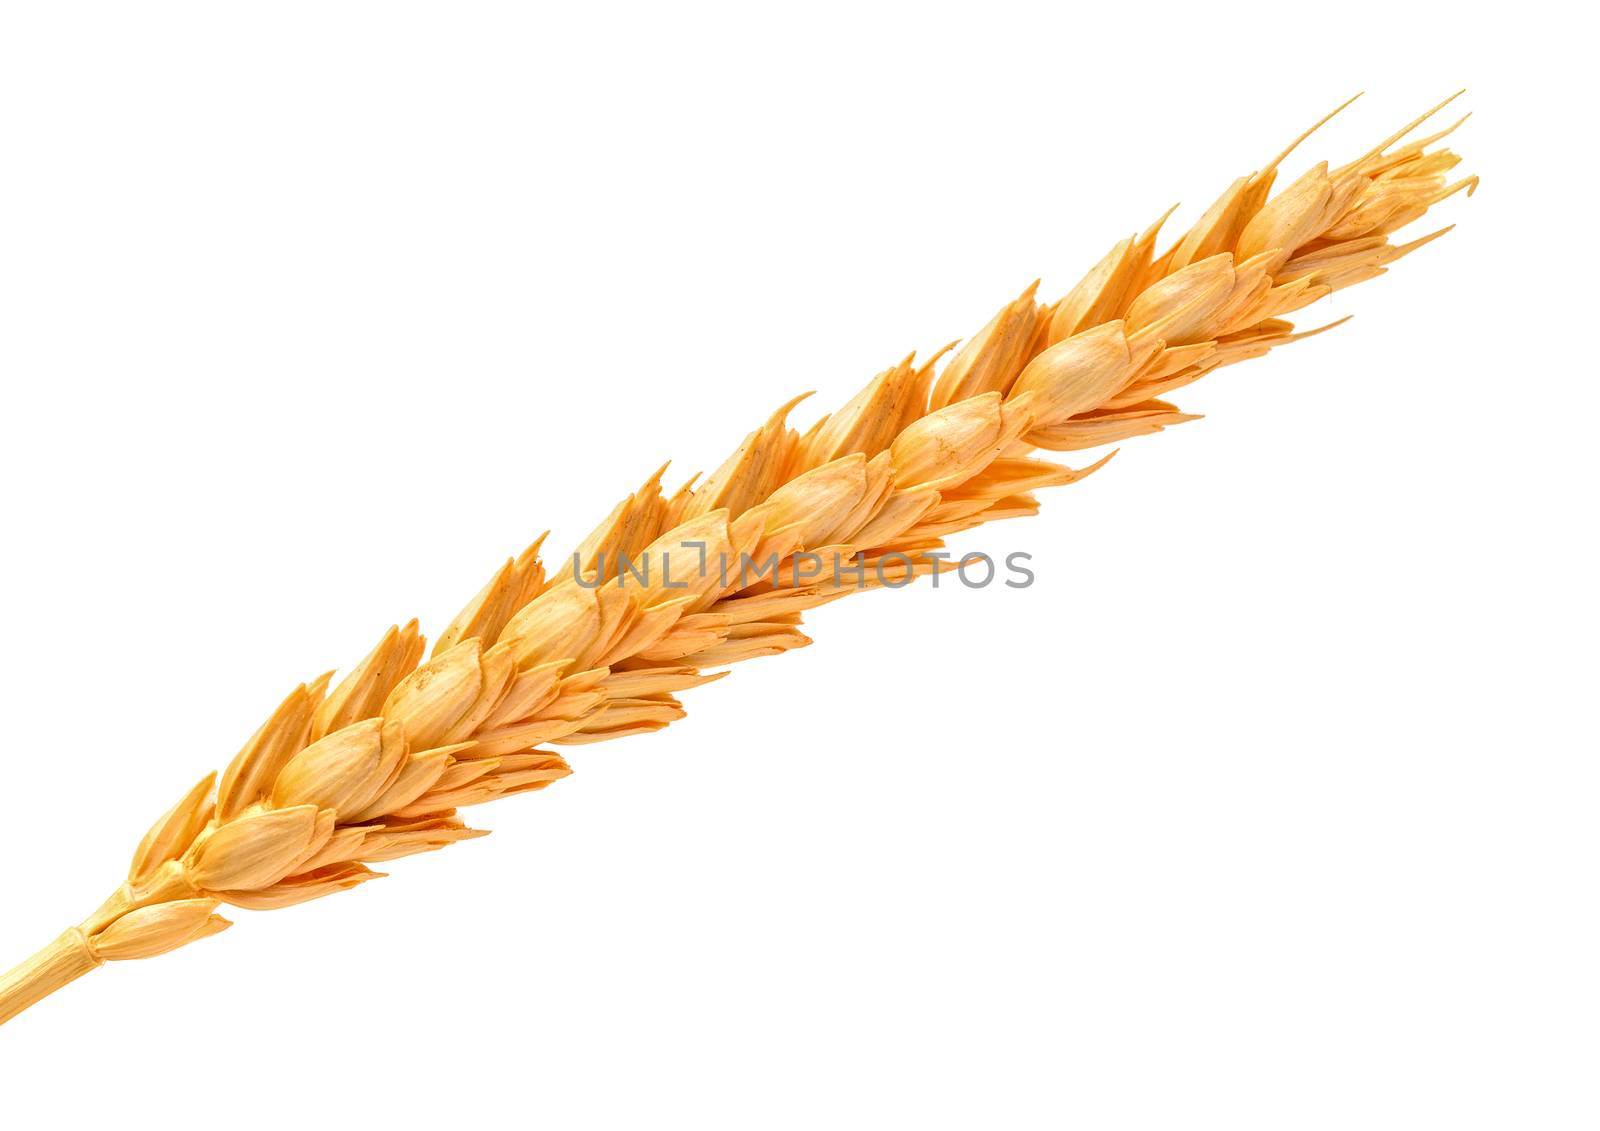 Golden Wheat Ears, isolated on white background